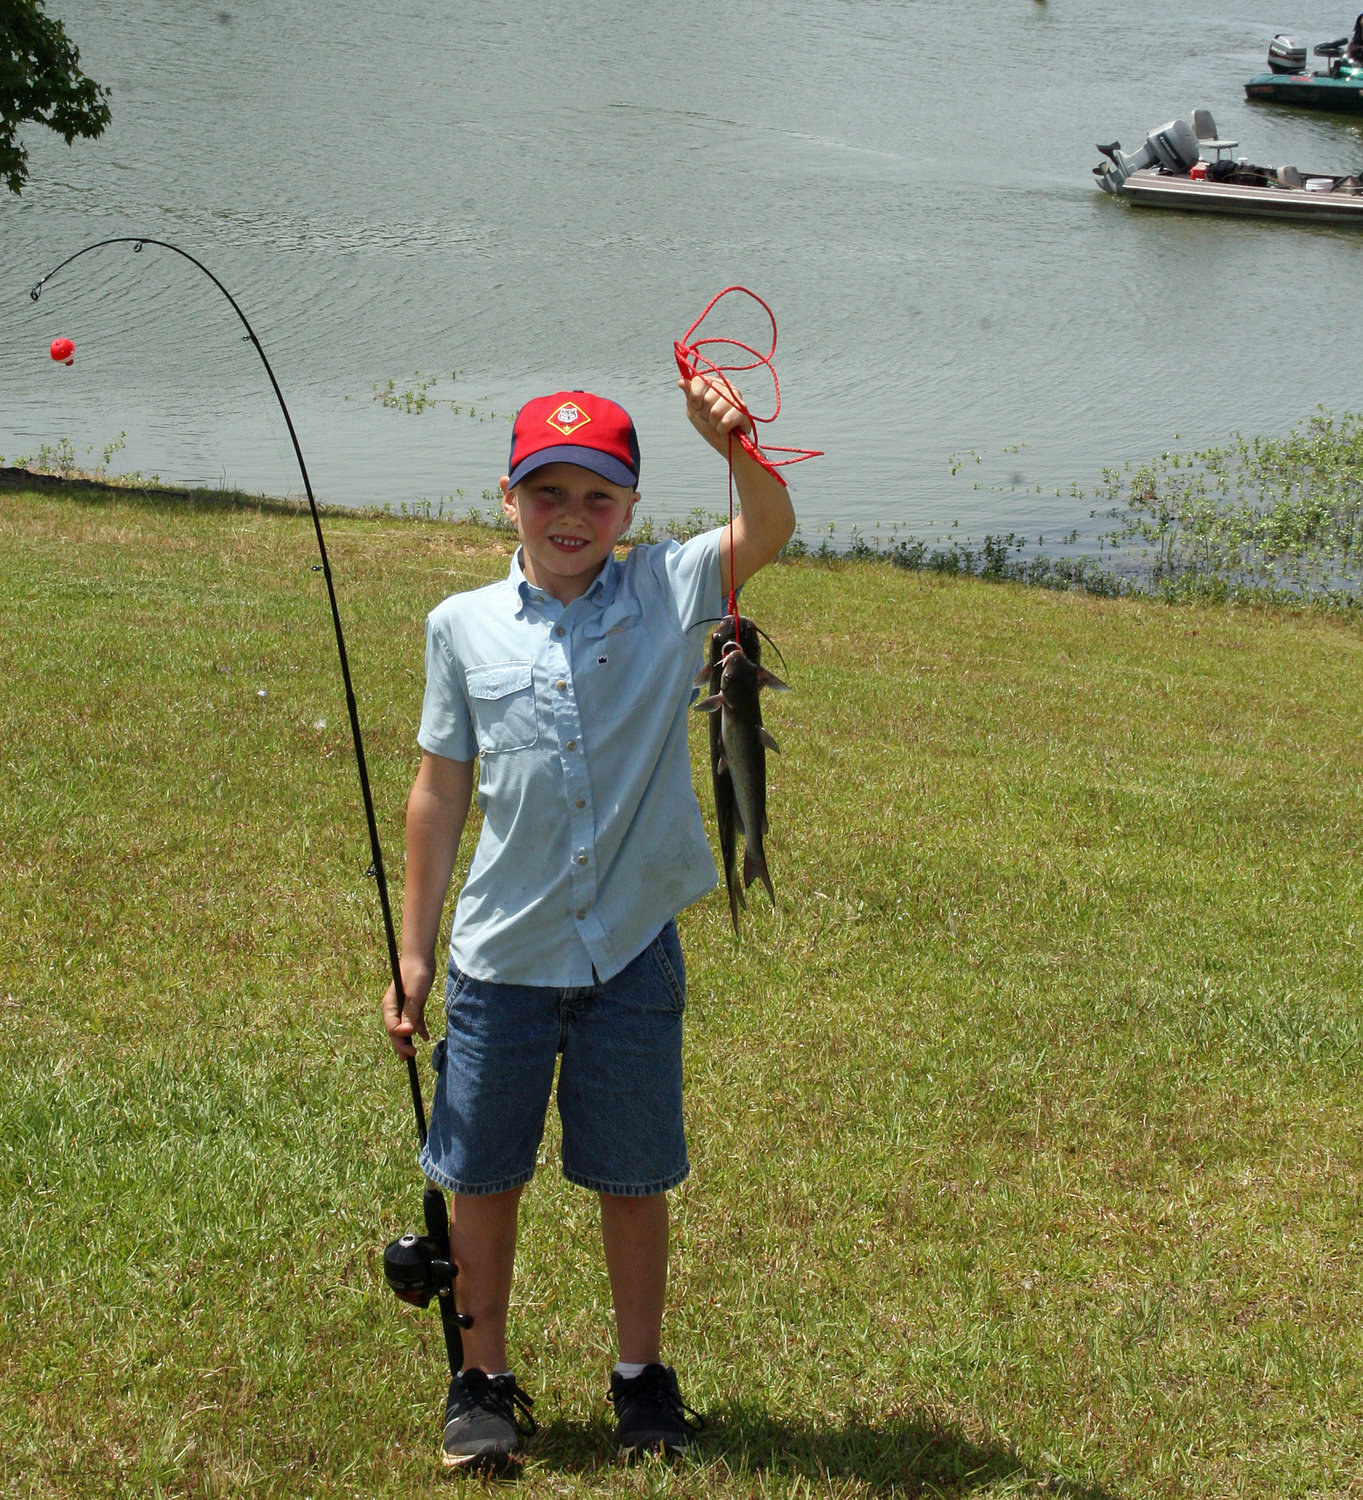 Harland Atkins, who attended the Go Fish, Alabama! event with his dad Brad, shows off his catch from Bibb County Lake.